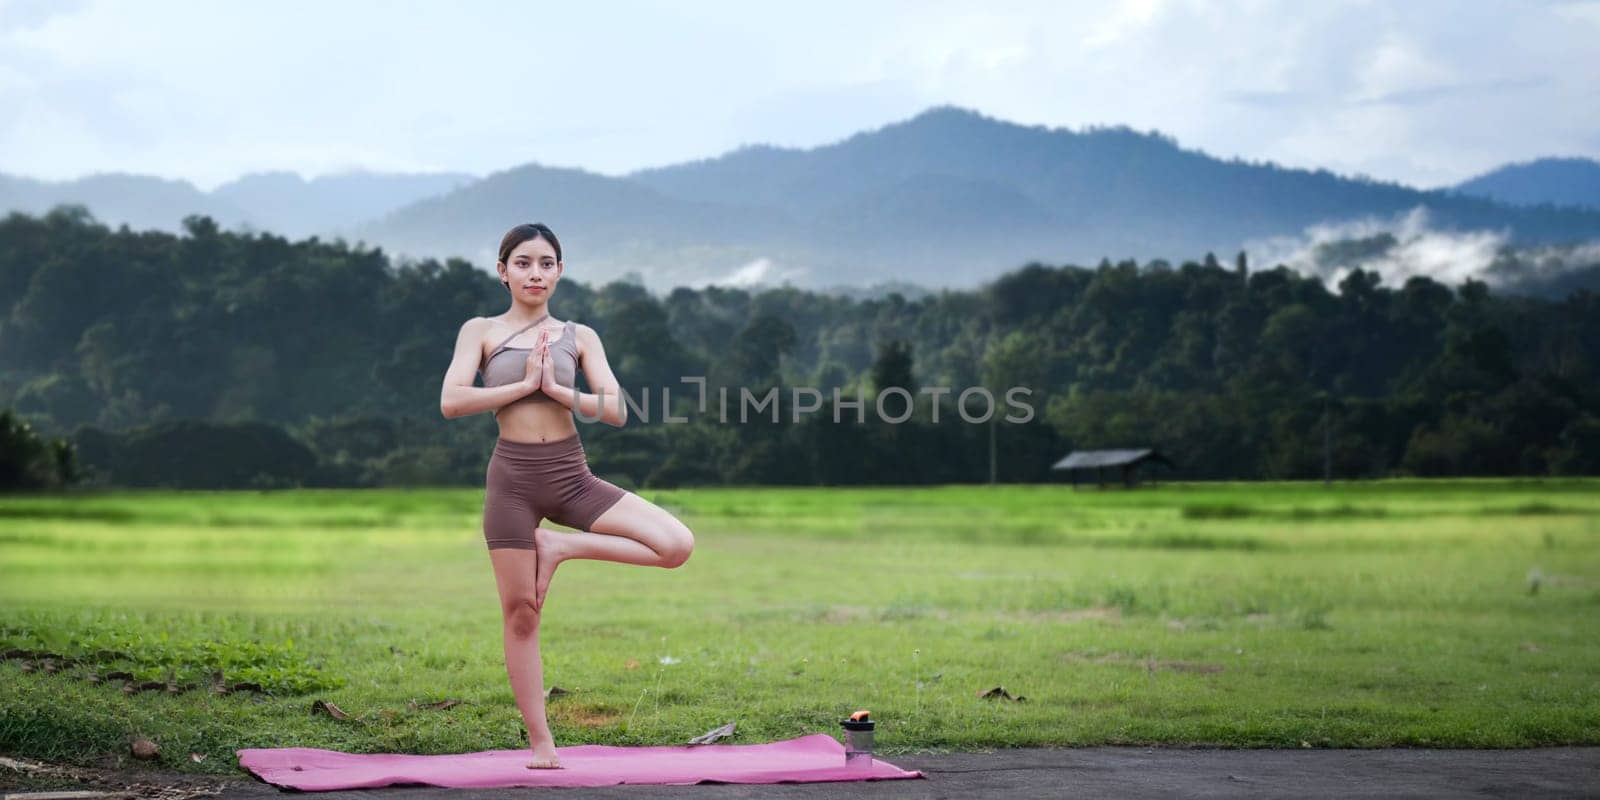 Asian woman standing on fitness mat, sporty lady practicing yoga at public park outdoor, stretching her body. Healthy active lifestyle.